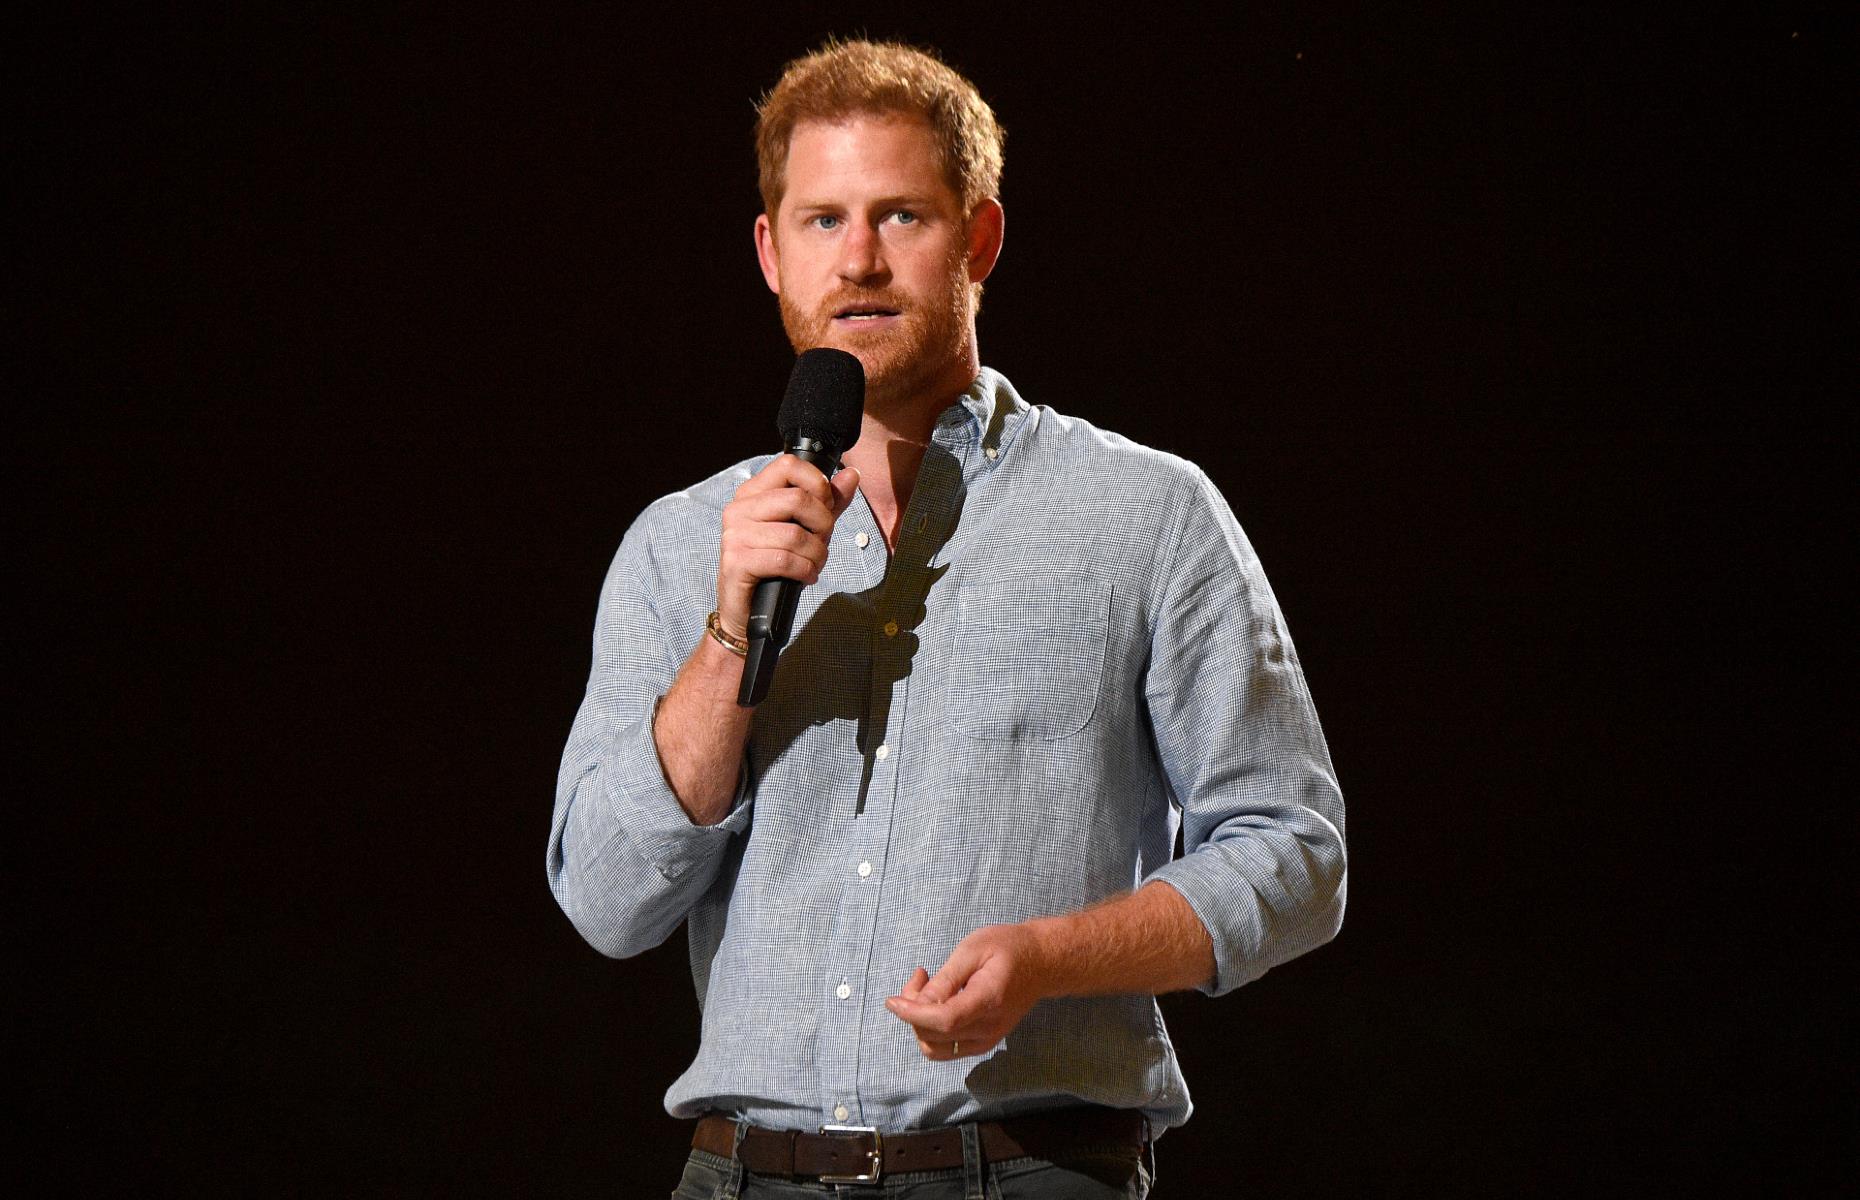 Prince Harry's book deal